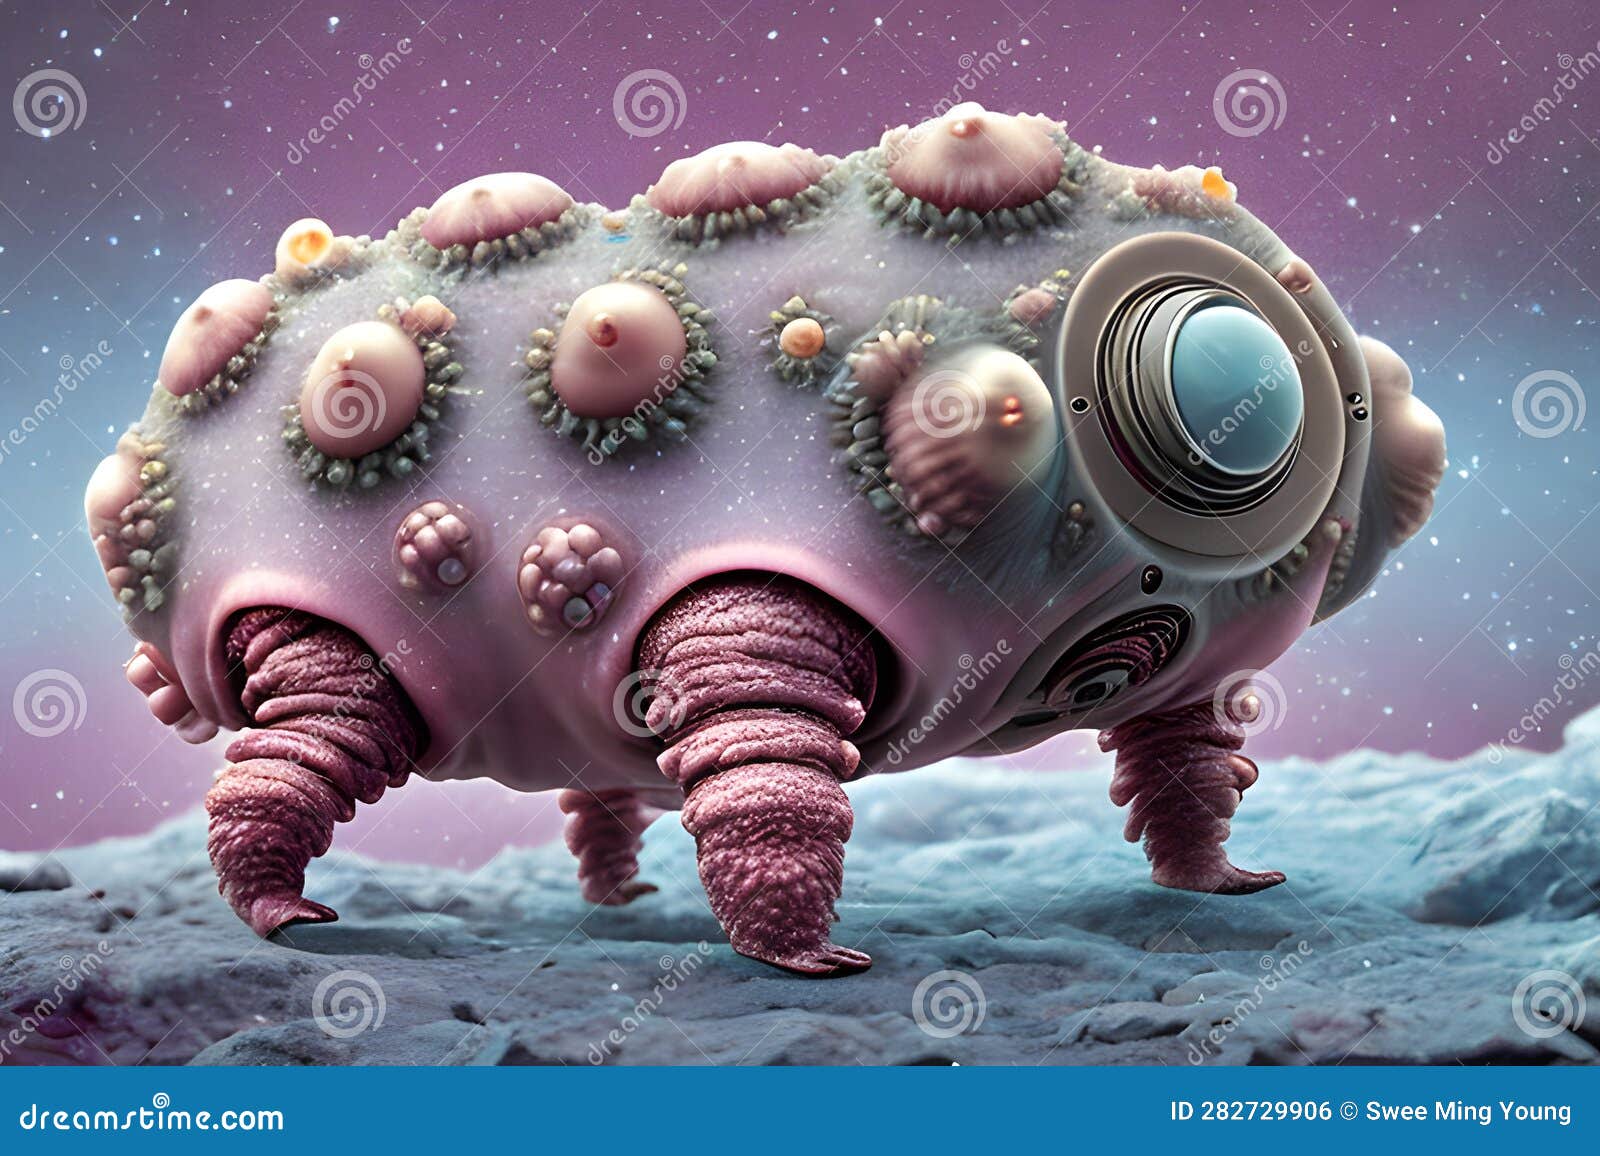 painterly image of the otherworldly landscape of a tardigrade and some bacteria.